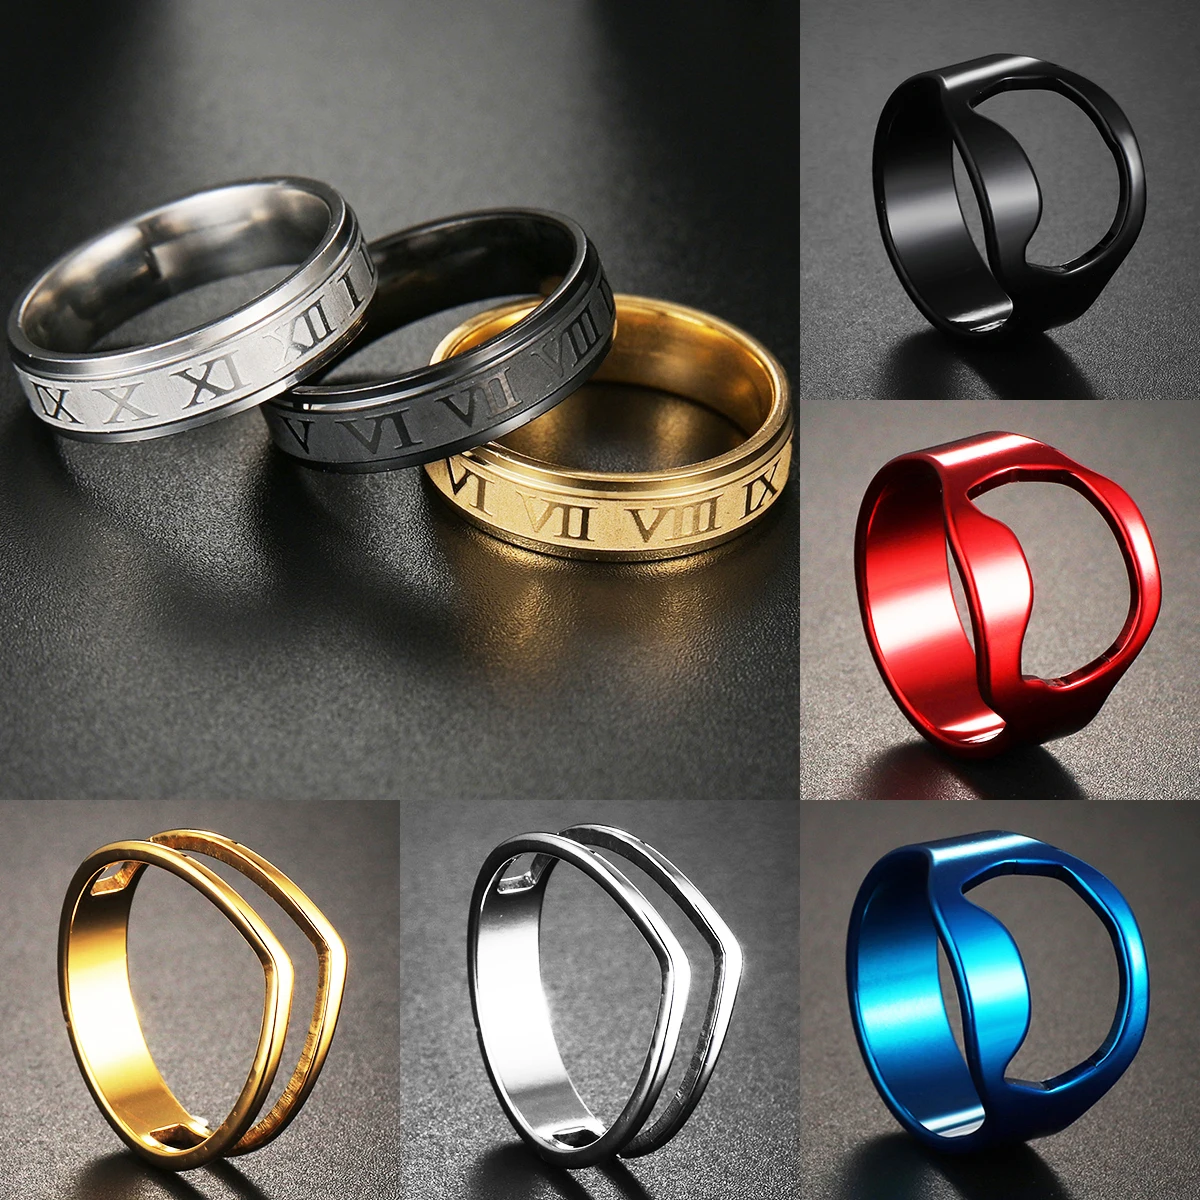 

Punk Stainless Steel Rings For Men Women Roman Numerals Black Silvery Rock Biker Party Wedding Ring Jewelry Gift Dropshipping